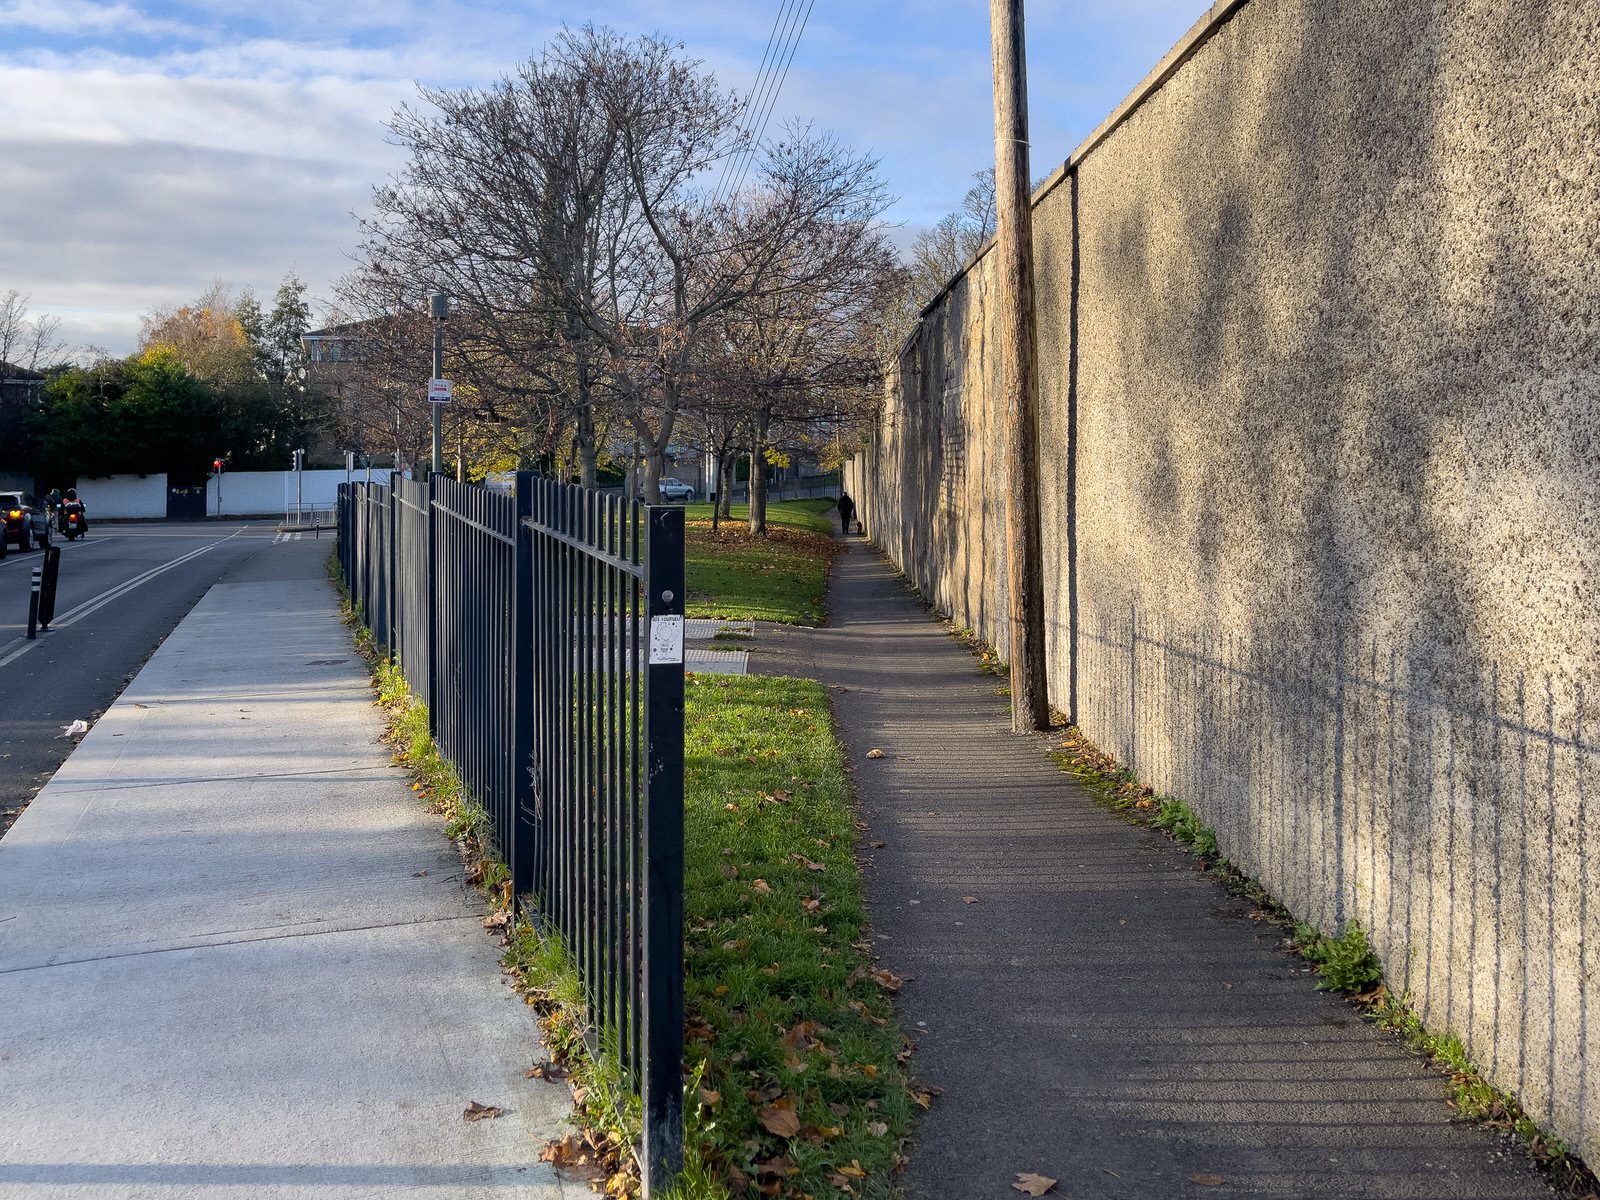 MY FIRST DAY WITHOUT THE 17 BUS SERVICE [WALK FROM S4 BUS STOP IN UCD TO ROEBUCK ROAD]-225601-1